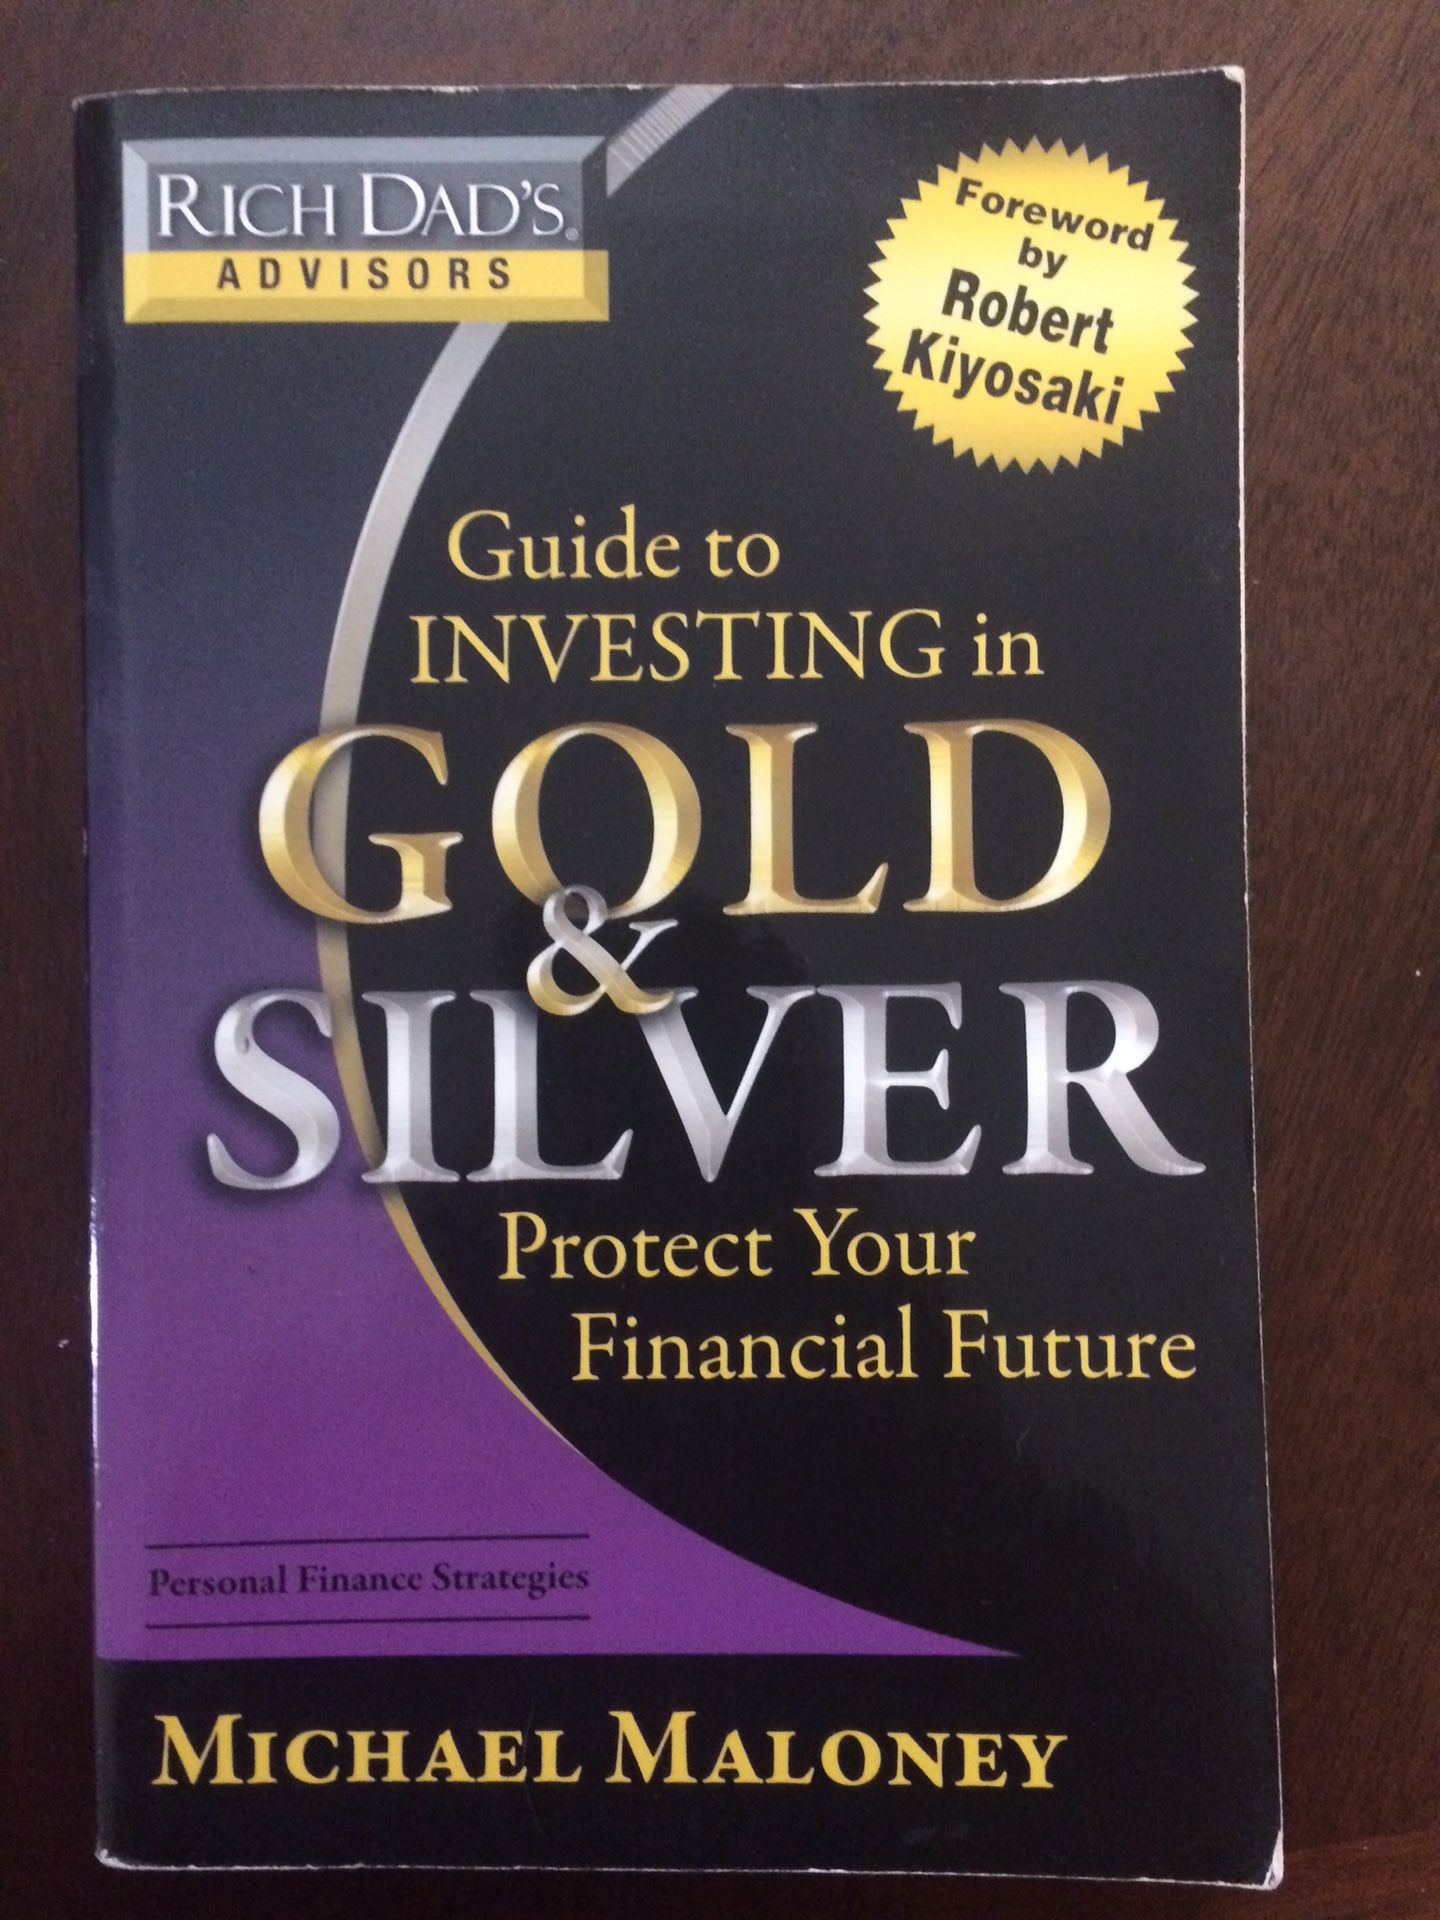 Guide to Investing in Gold & Silver by Michael Maloney